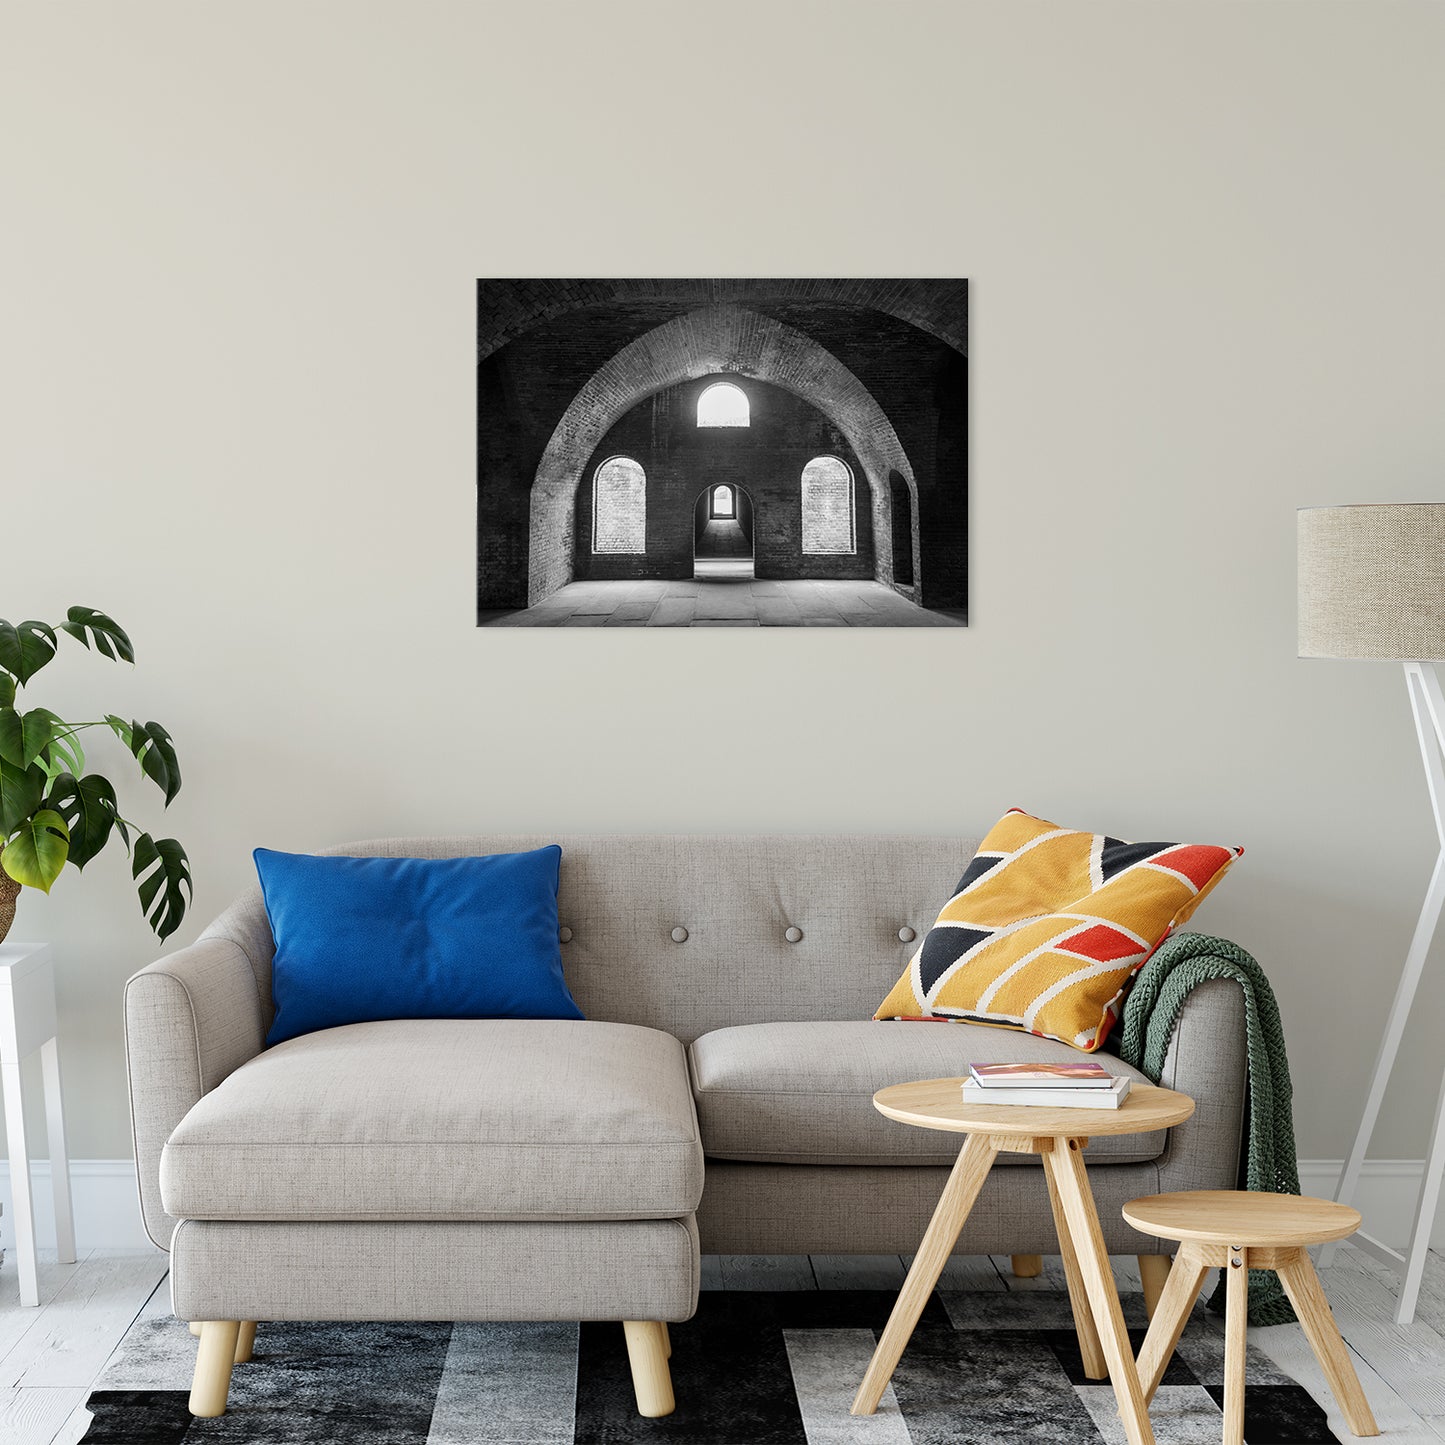 Industrial Chic Wall Art: Fort Clinch Bunker Room Black and White 2 Architecture Photo Fine Art Canvas Wall Art Print